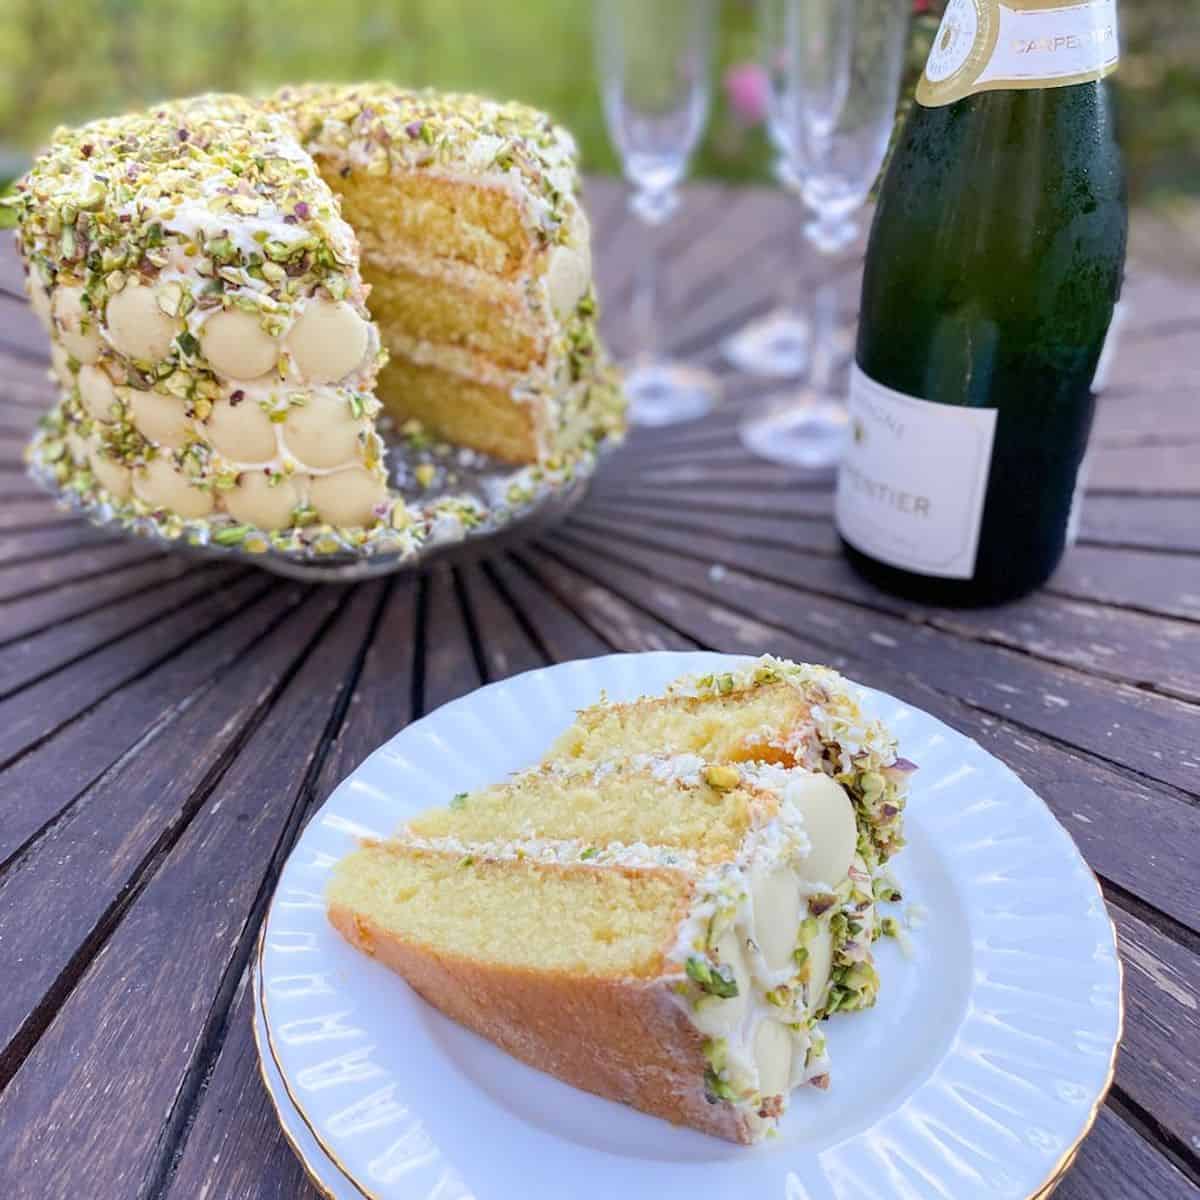 white chocolate and pistachio cake with champagne